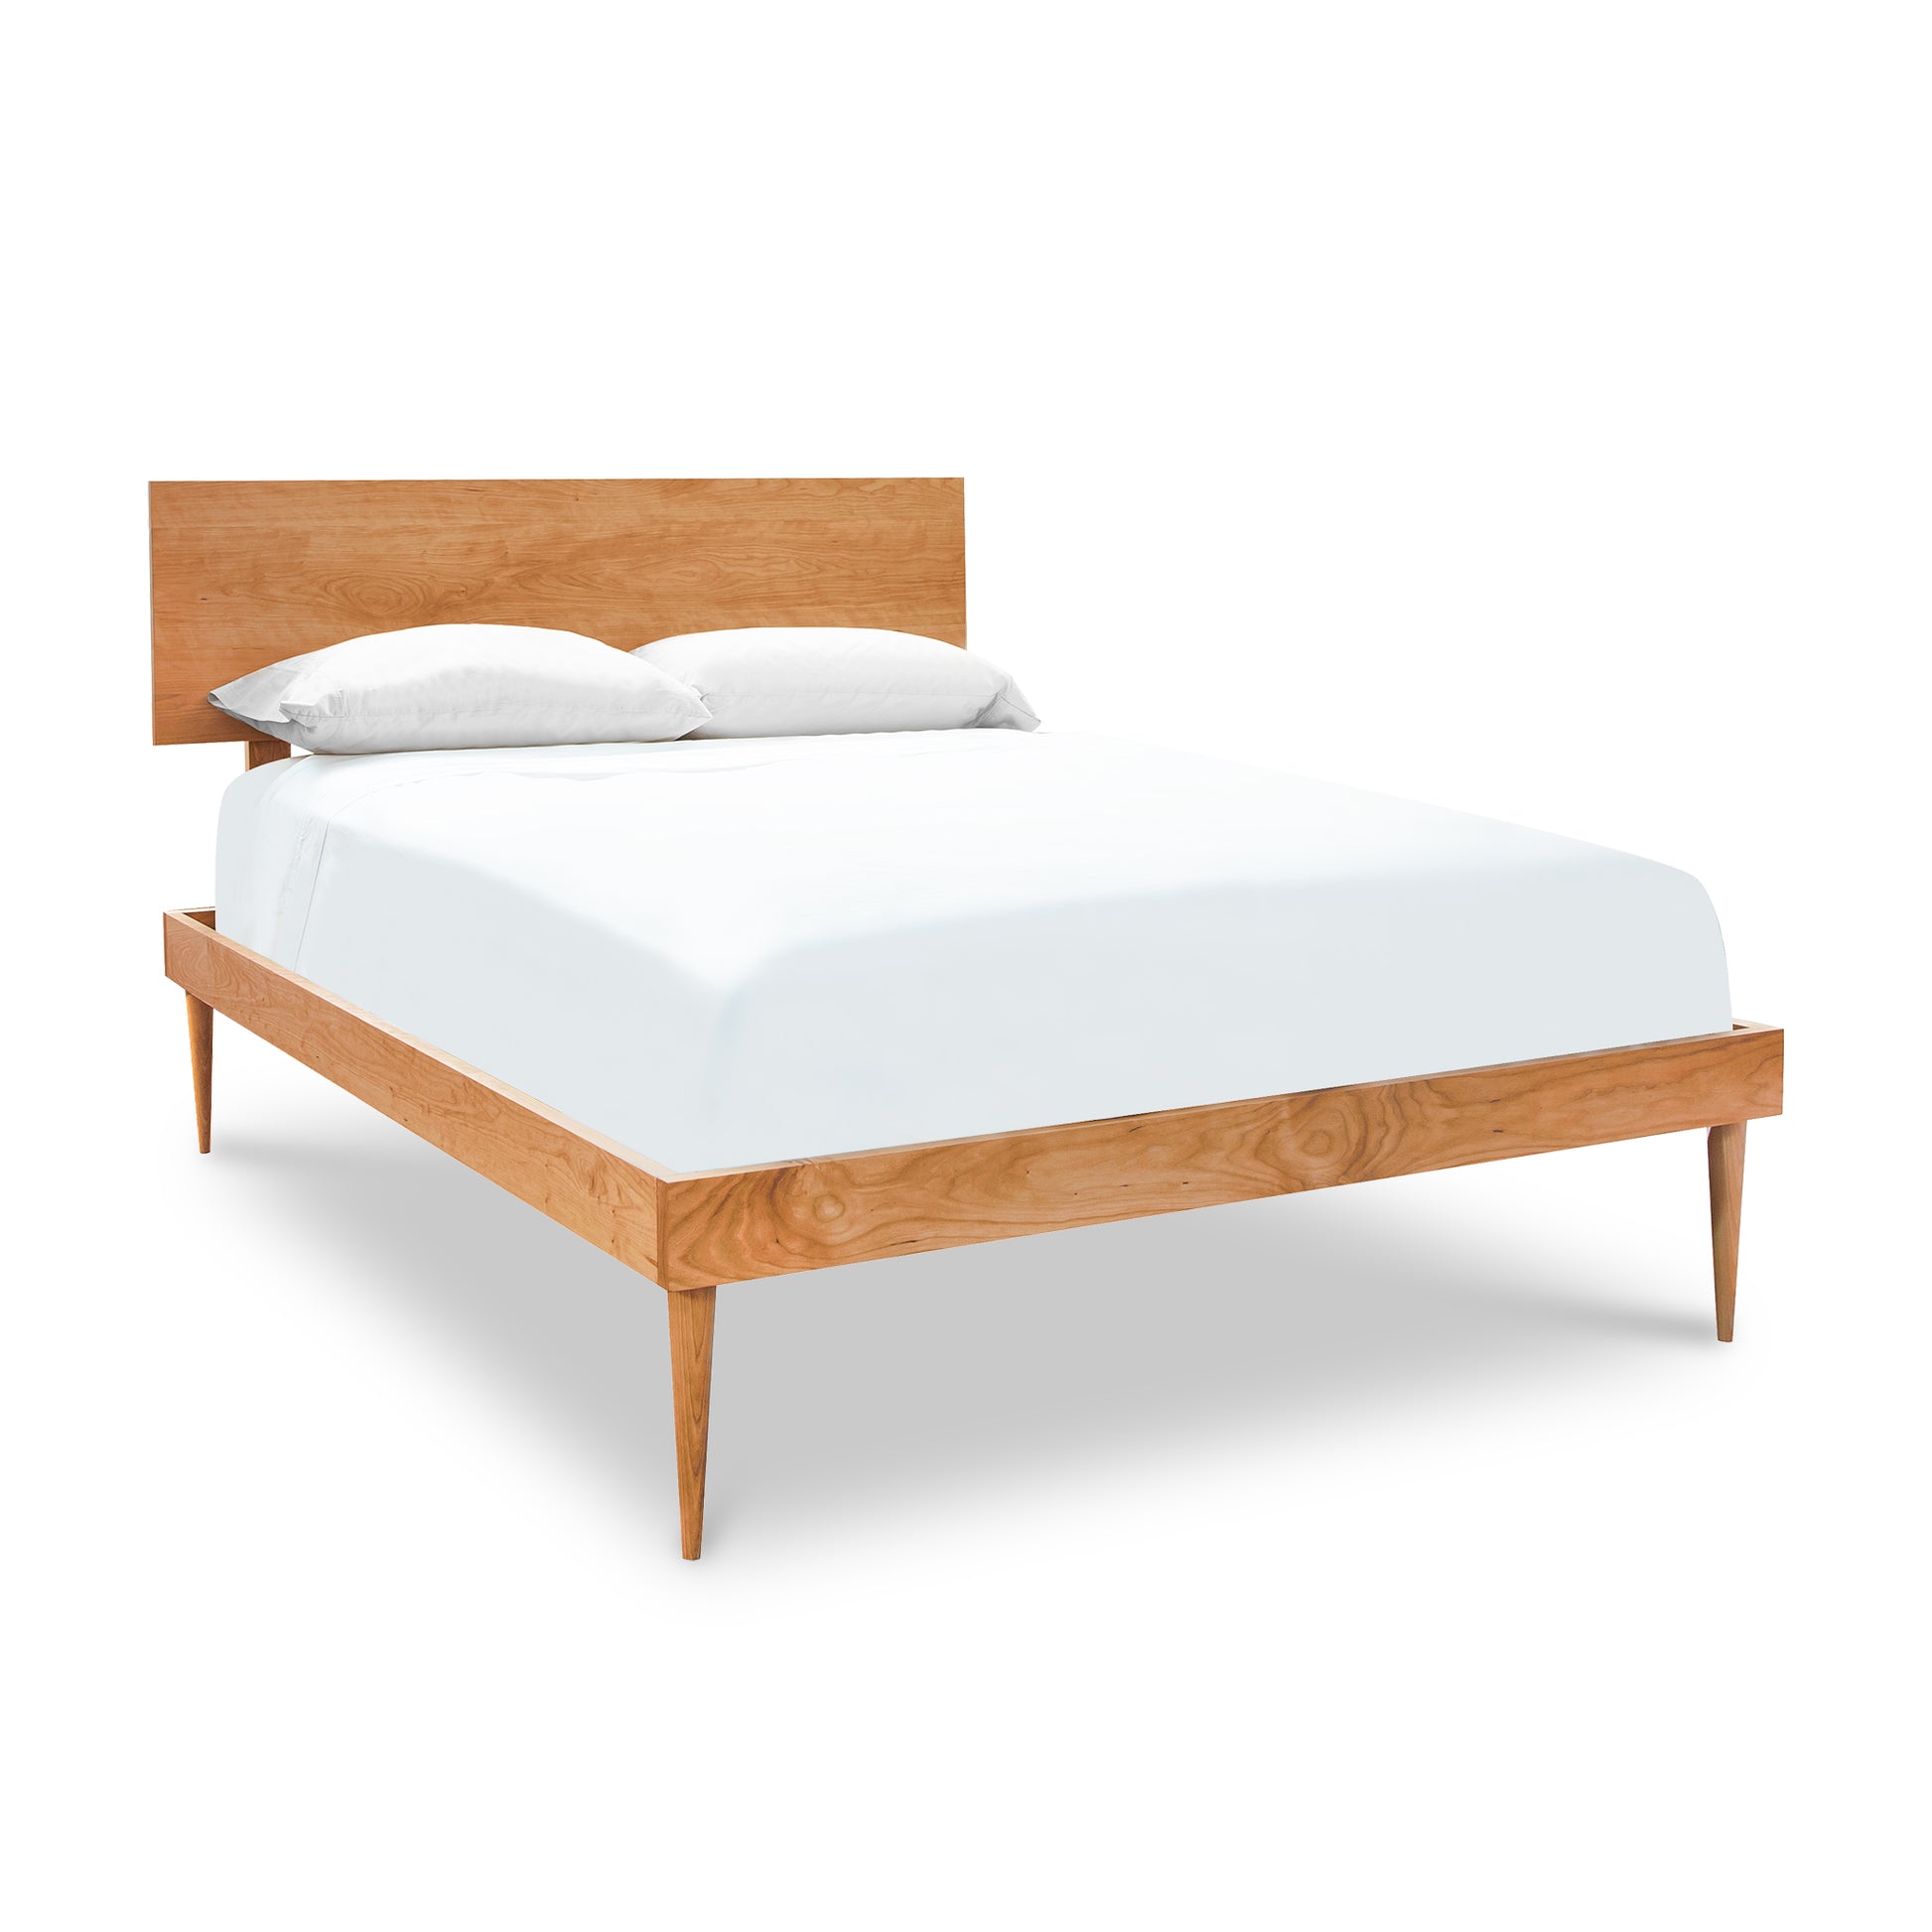 A Vermont Furniture Designs Larssen bed frame in natural cherry wood with a headboard, fitted with white bedding and two pillows, isolated on a white background.